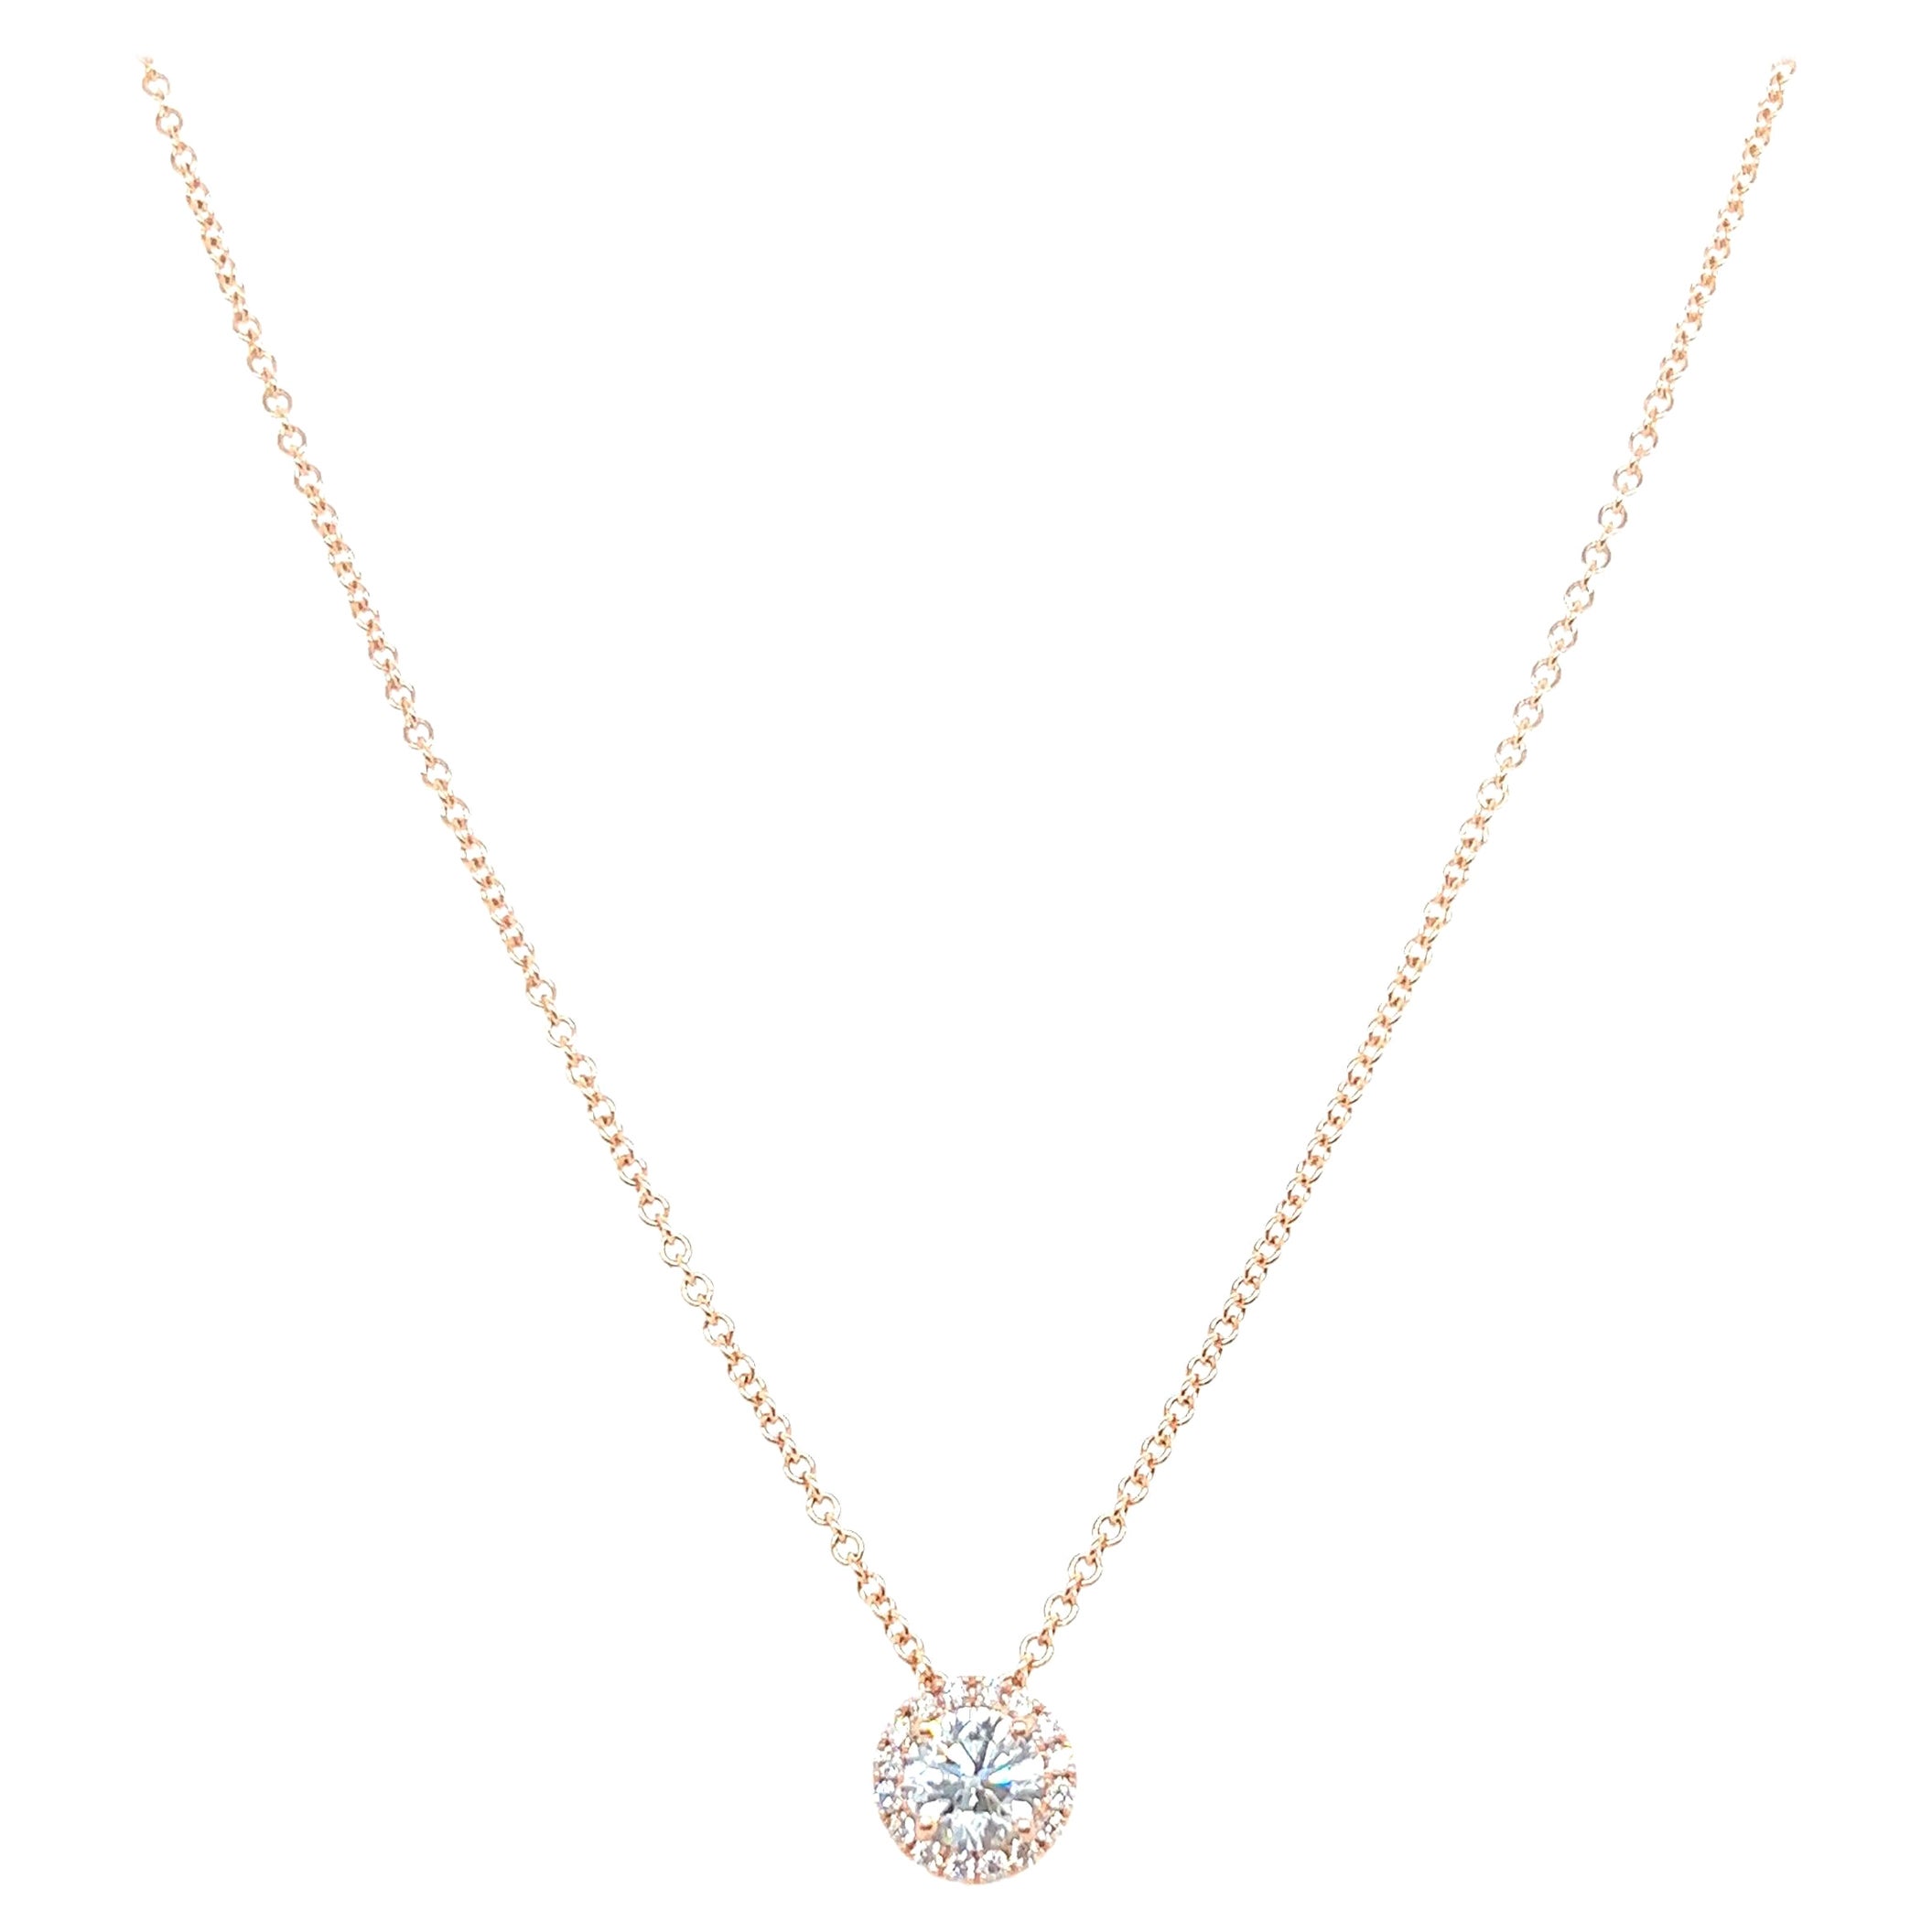 14 Inch 14k Yellow Gold 0.90 Carat Round Cut Diamond Solitaire Pendant Necklace